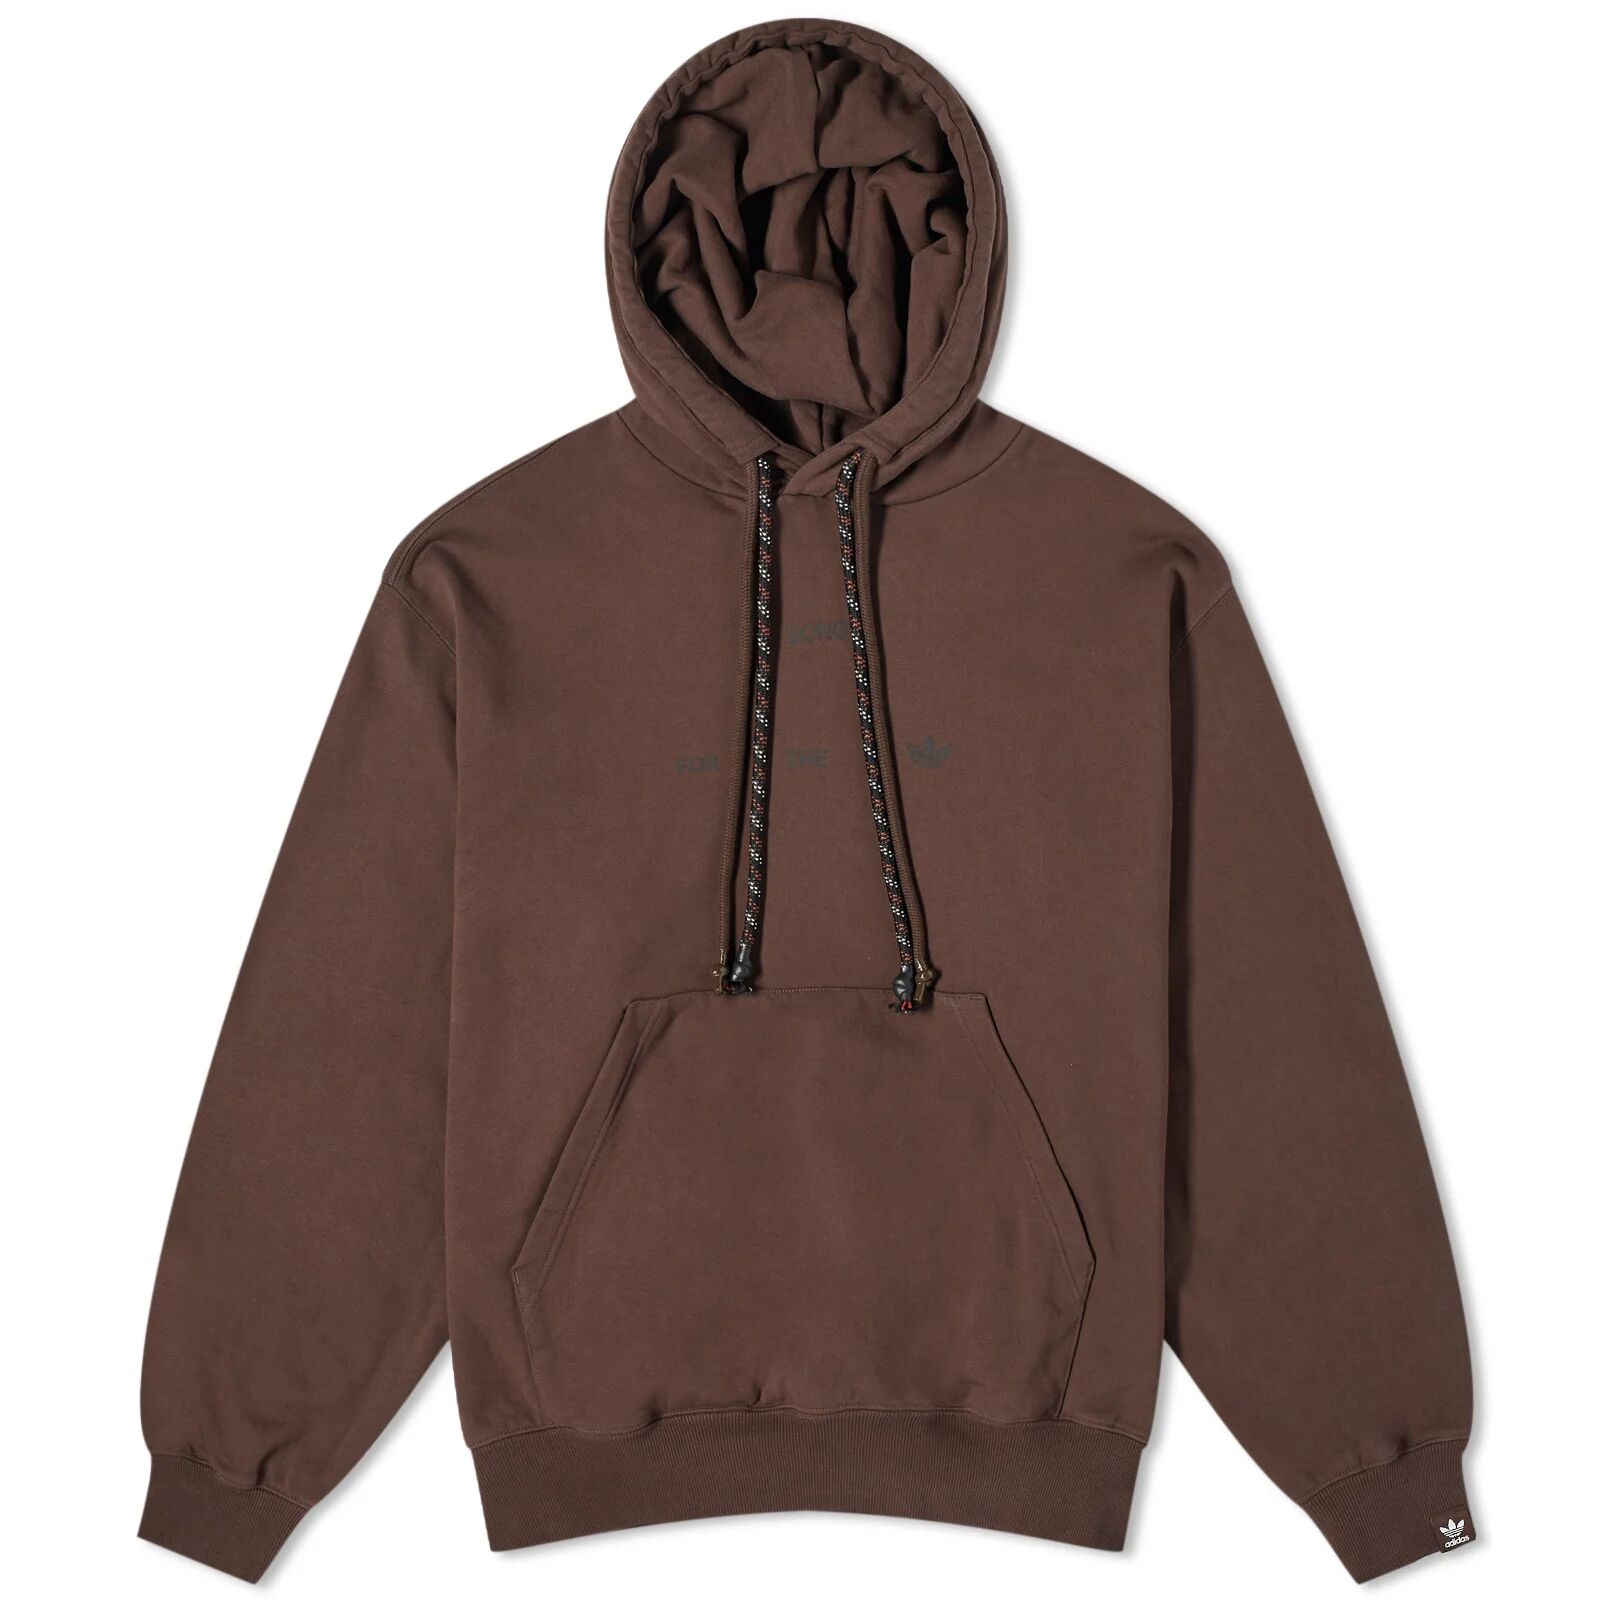 Adidas x Song for the Mute Hoody in Brown, Size X-Large